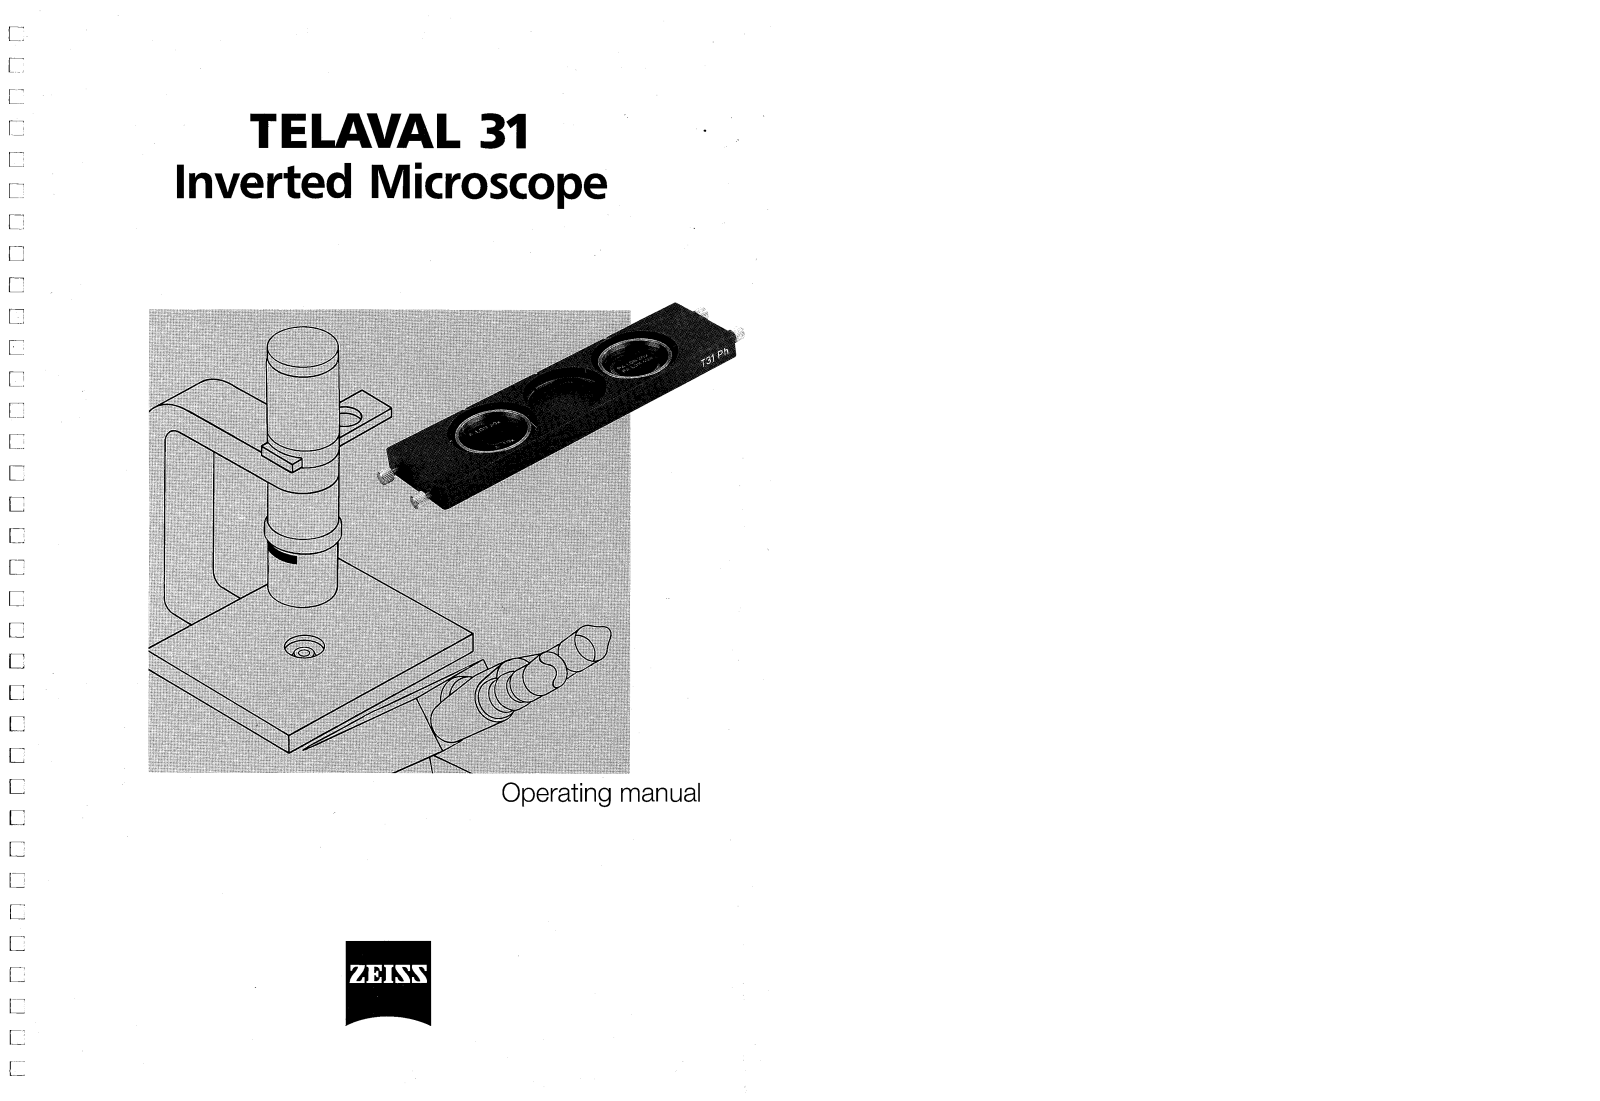 Zeiss TELAVAL 31 Operating Manual